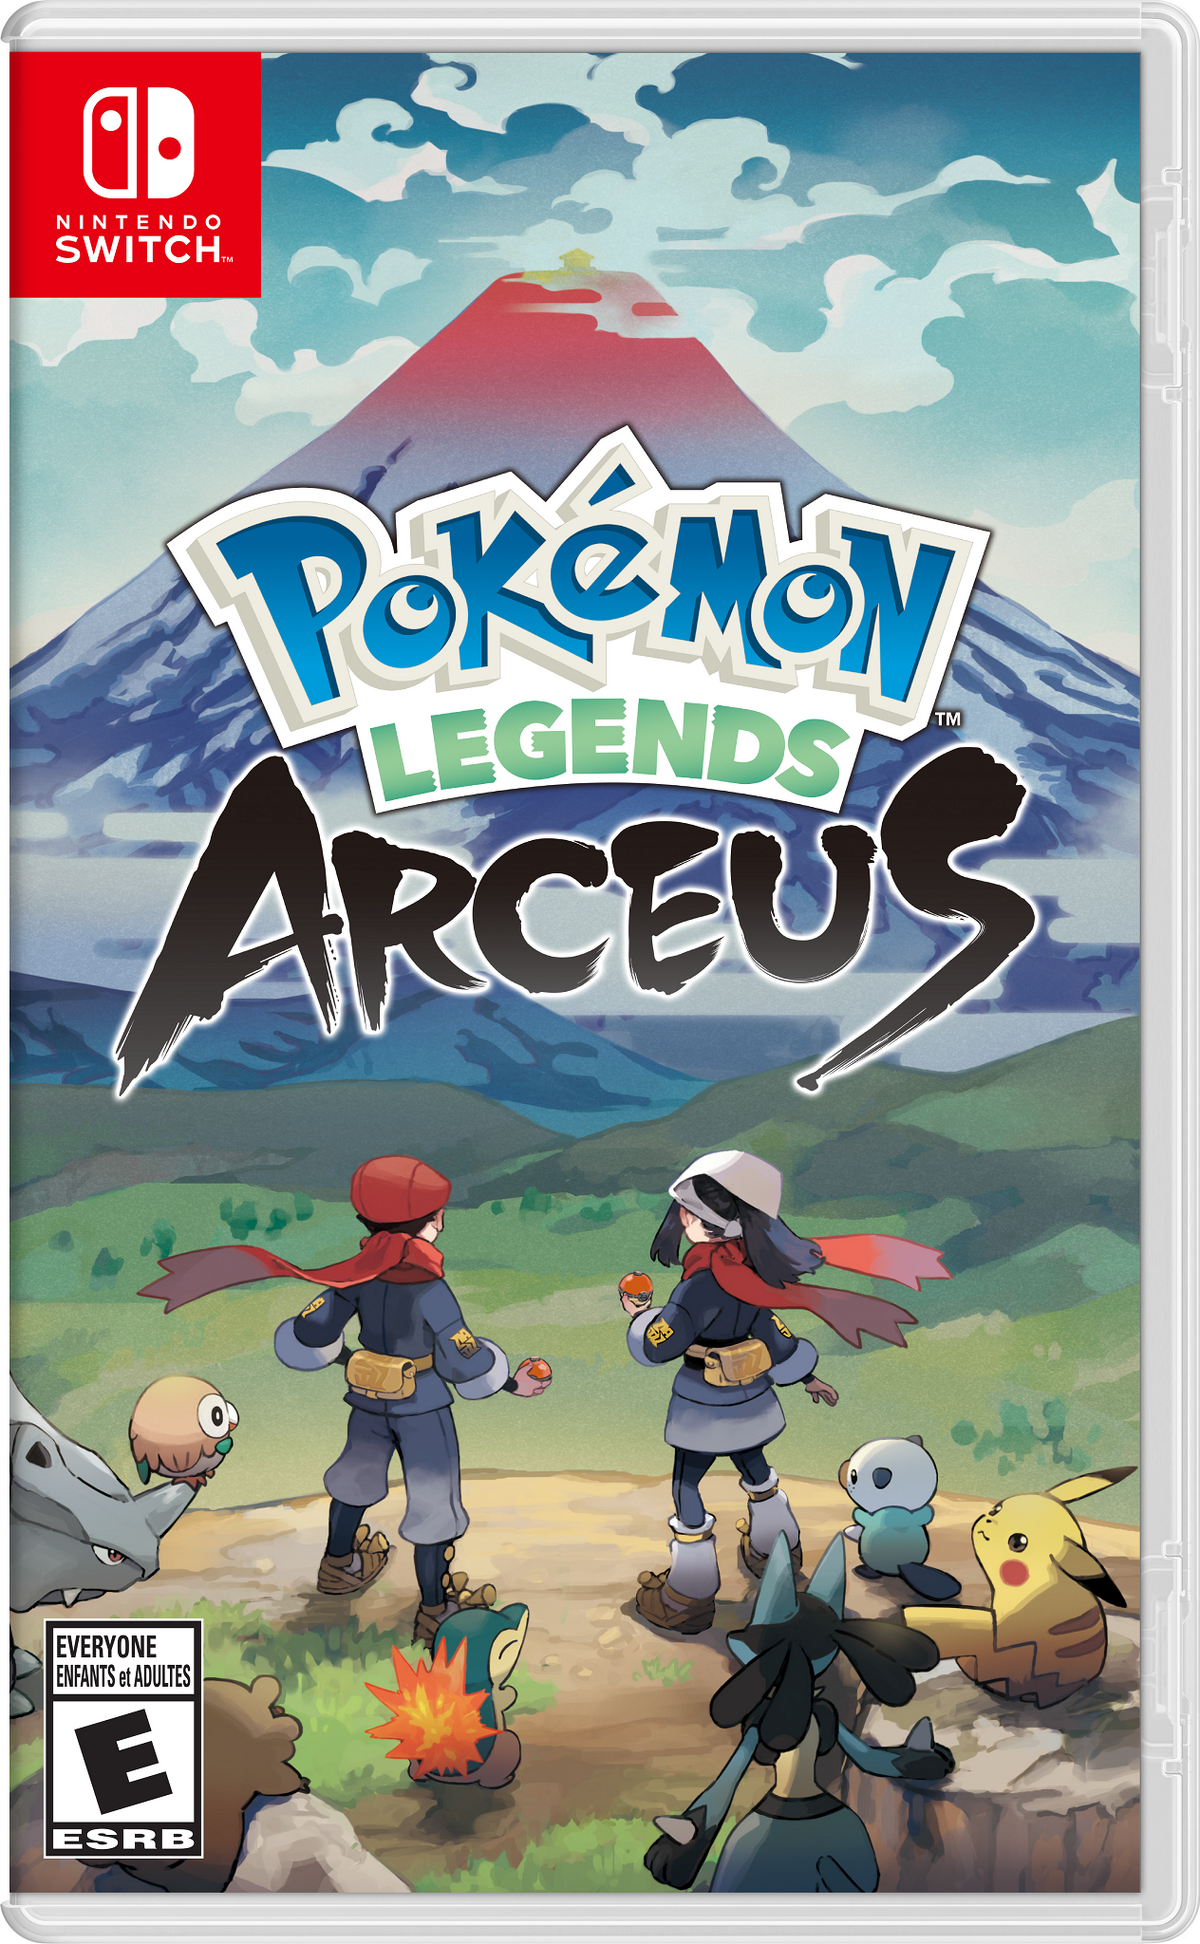 Pokémon Legends Arceus Update 1.0.1 Day-One Addresses Some Issues to Give  Players a “Better Gaming Experience”